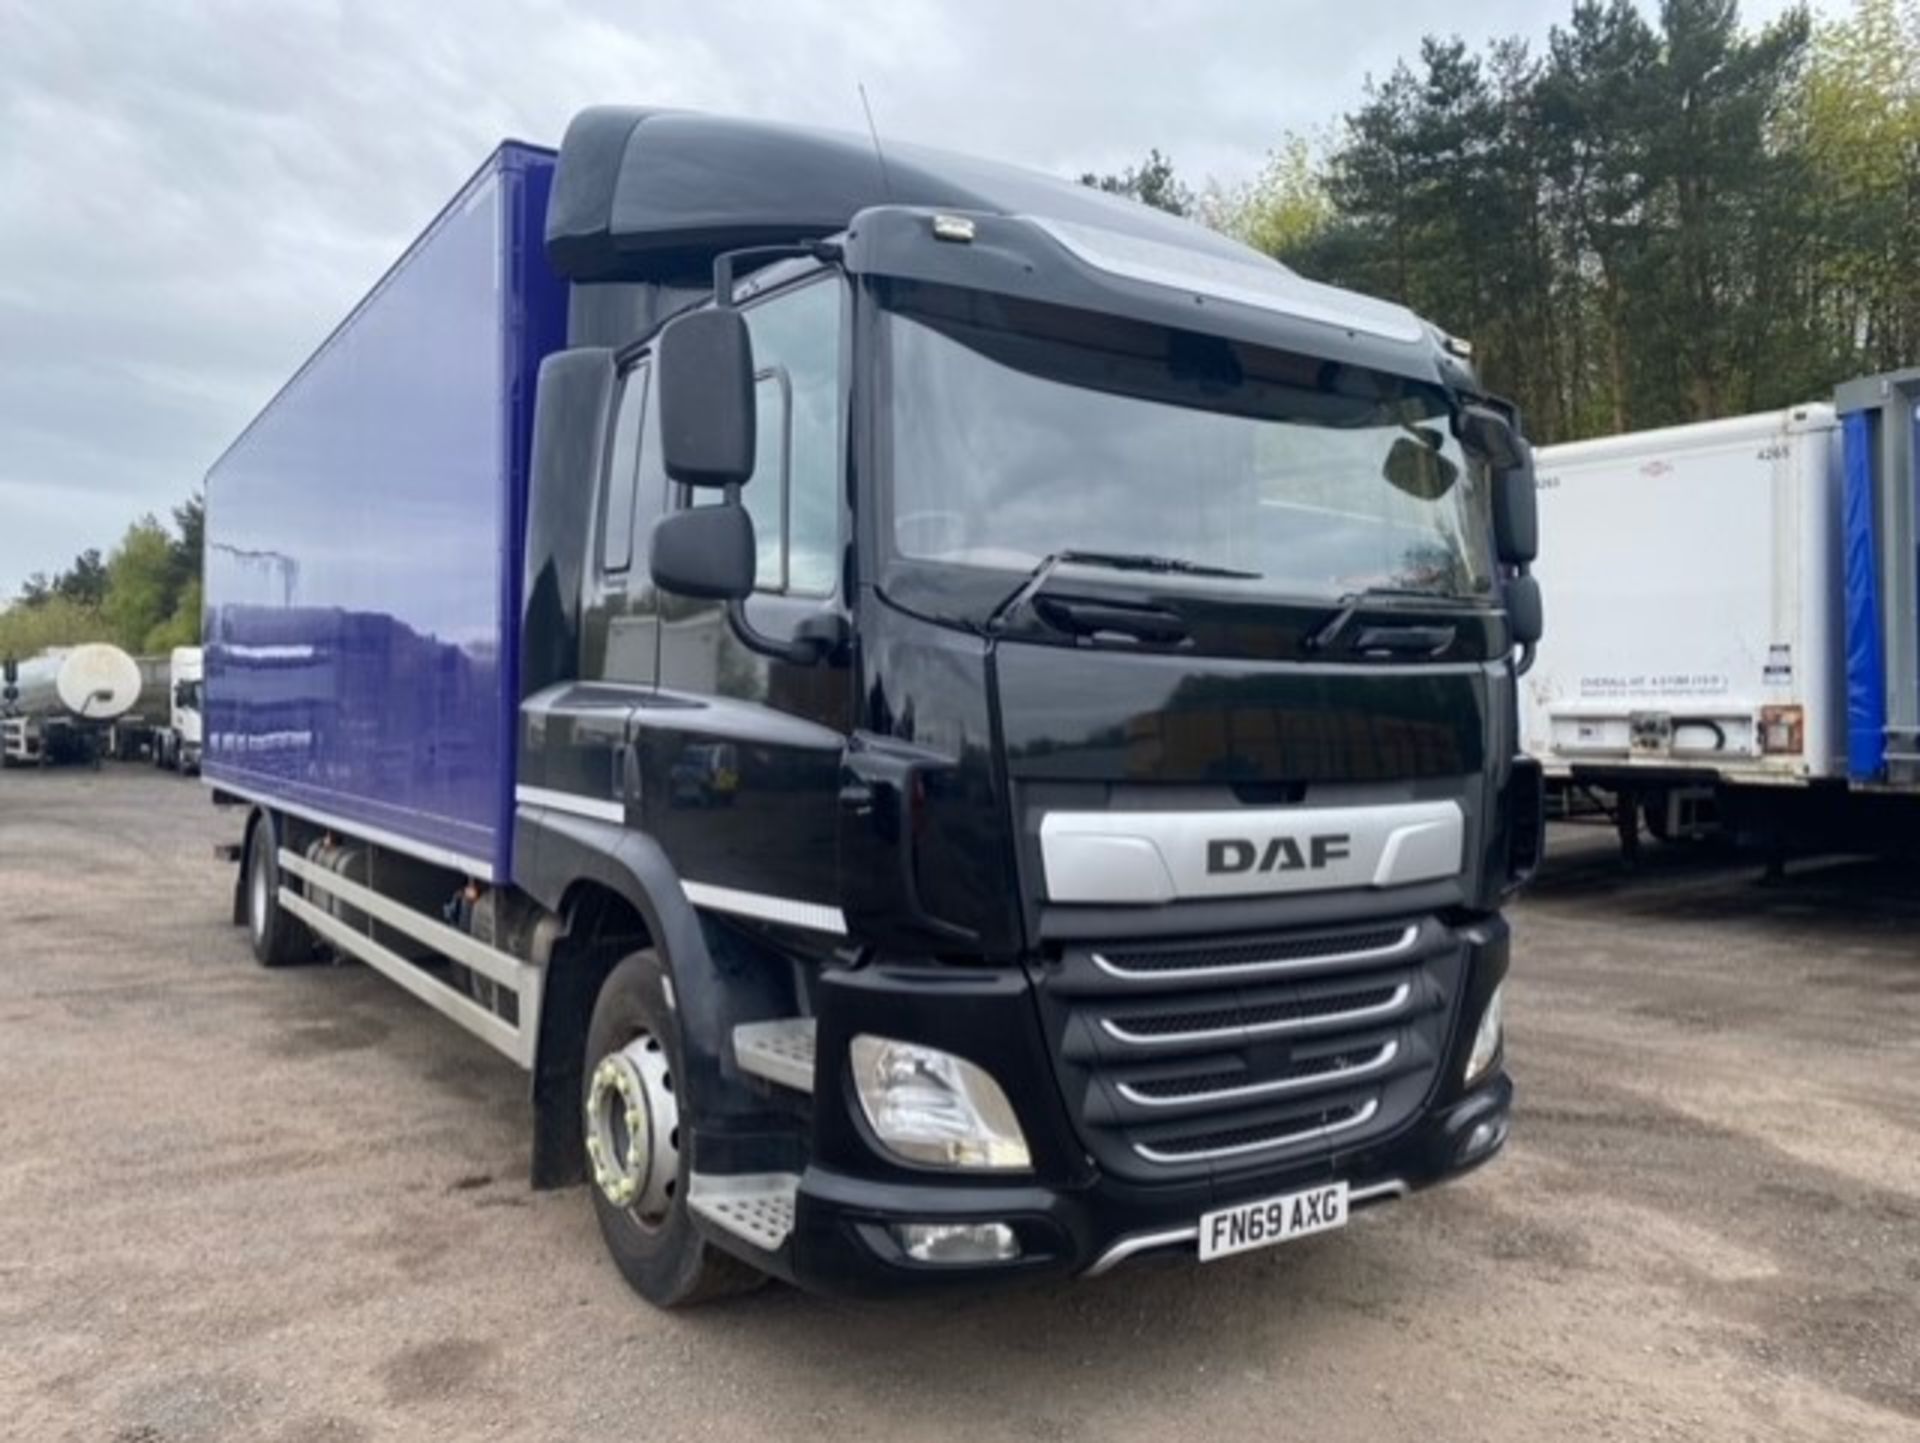 2019, DAF CF 260 - FN69 AXG (18 Ton Rigid Truck with Tail Lift) - Image 3 of 16